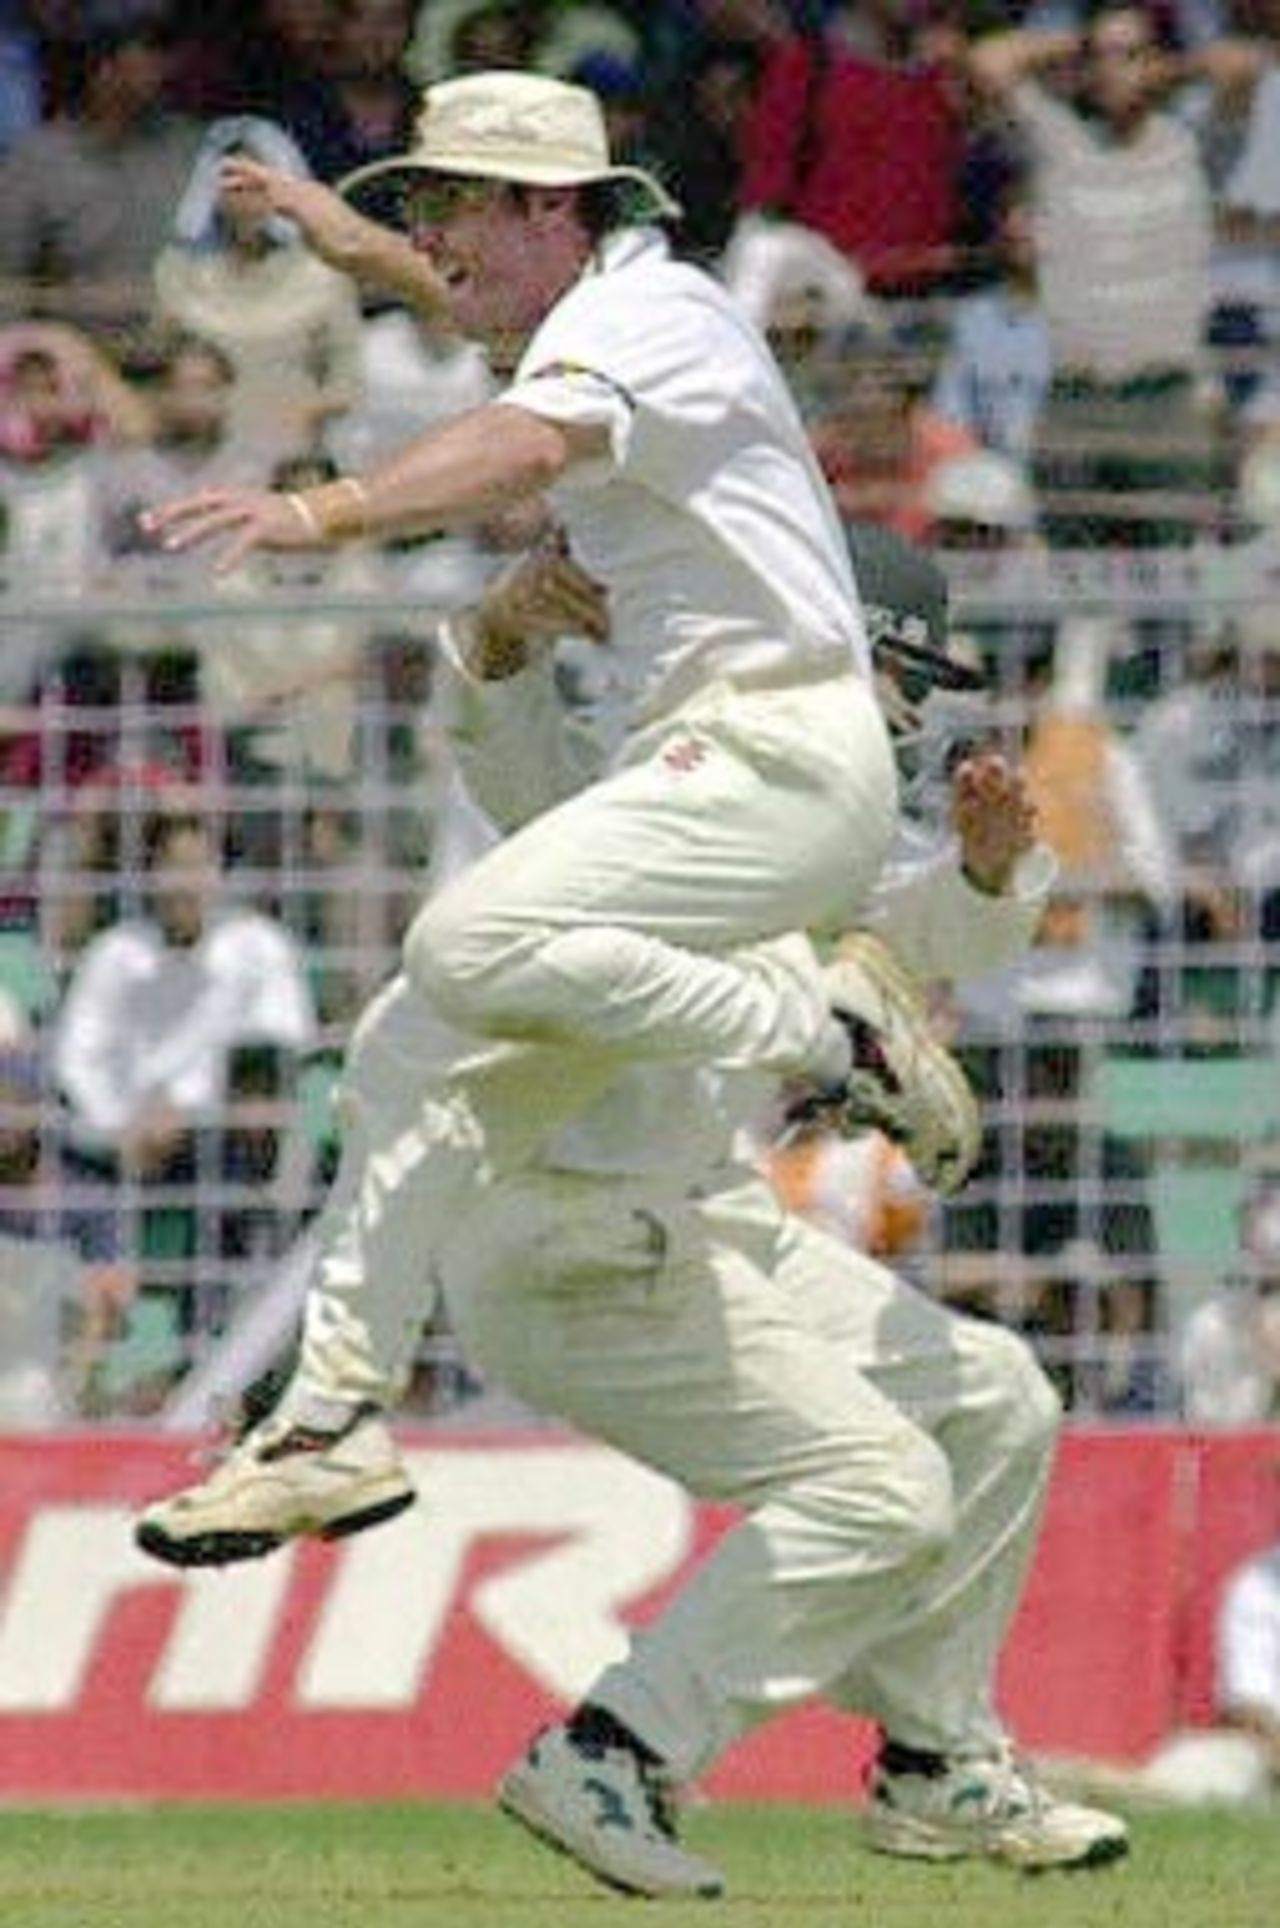 Australian player Michael Slater jumps with joy as the Australian team celebrates after Indian captain Sourav Ganguly was run out from a throw by Slater on the third day of the first test match between India and Australia at the Wankhade Stadium in Mumbai 01 March 2001. Ganguly was out at 1 run as India were in deep trouble at 180 for 6 after conceding a 173 runs lead to Australia in the first innings.